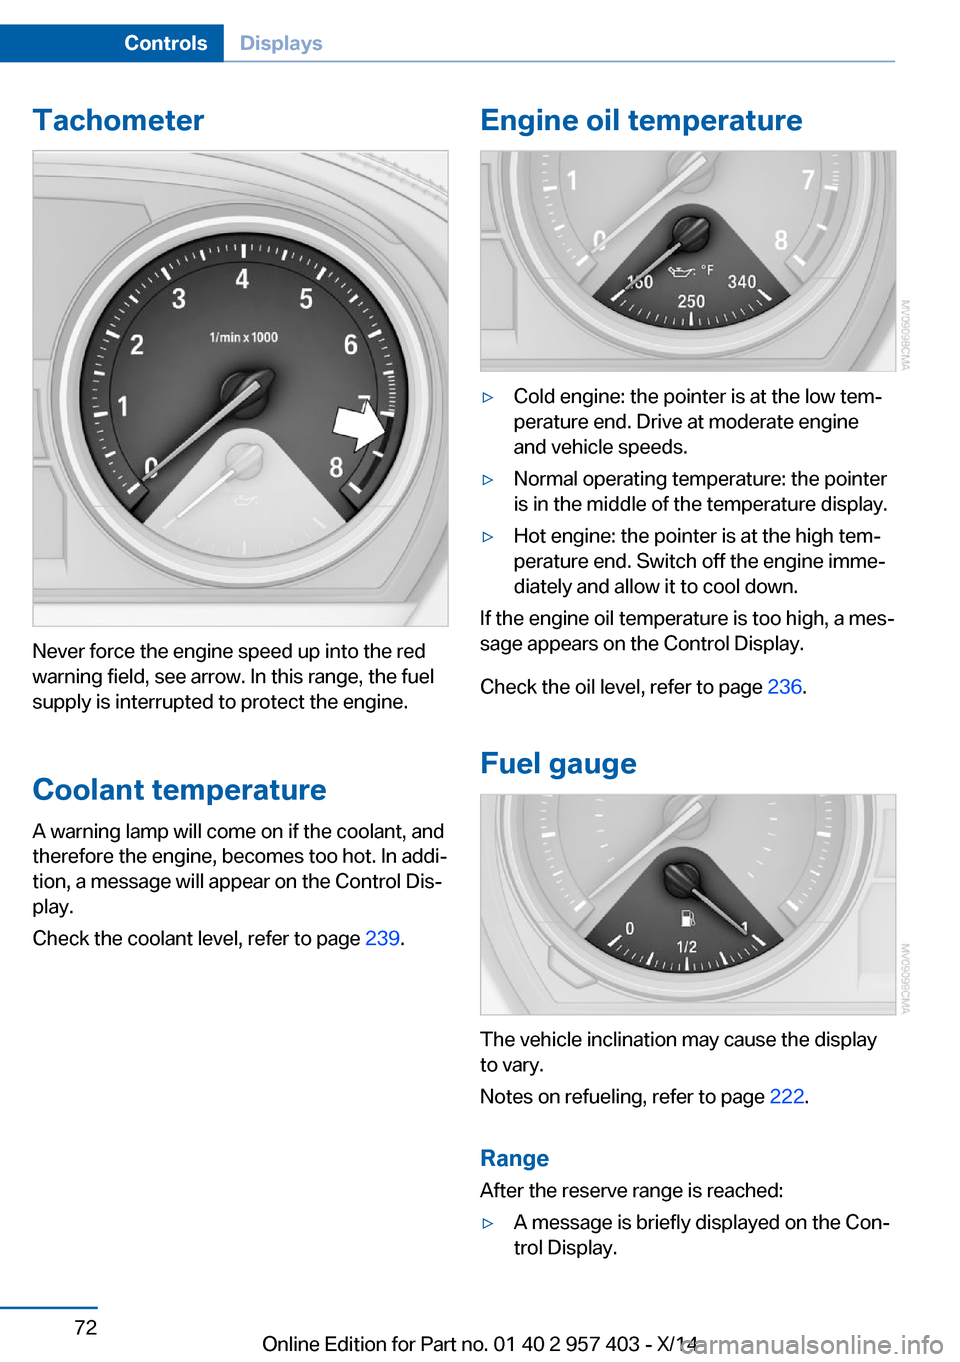 BMW Z4 2014 E89 Owners Manual Tachometer
Never force the engine speed up into the red
warning field, see arrow. In this range, the fuel
supply is interrupted to protect the engine.
Coolant temperature A warning lamp will come on i